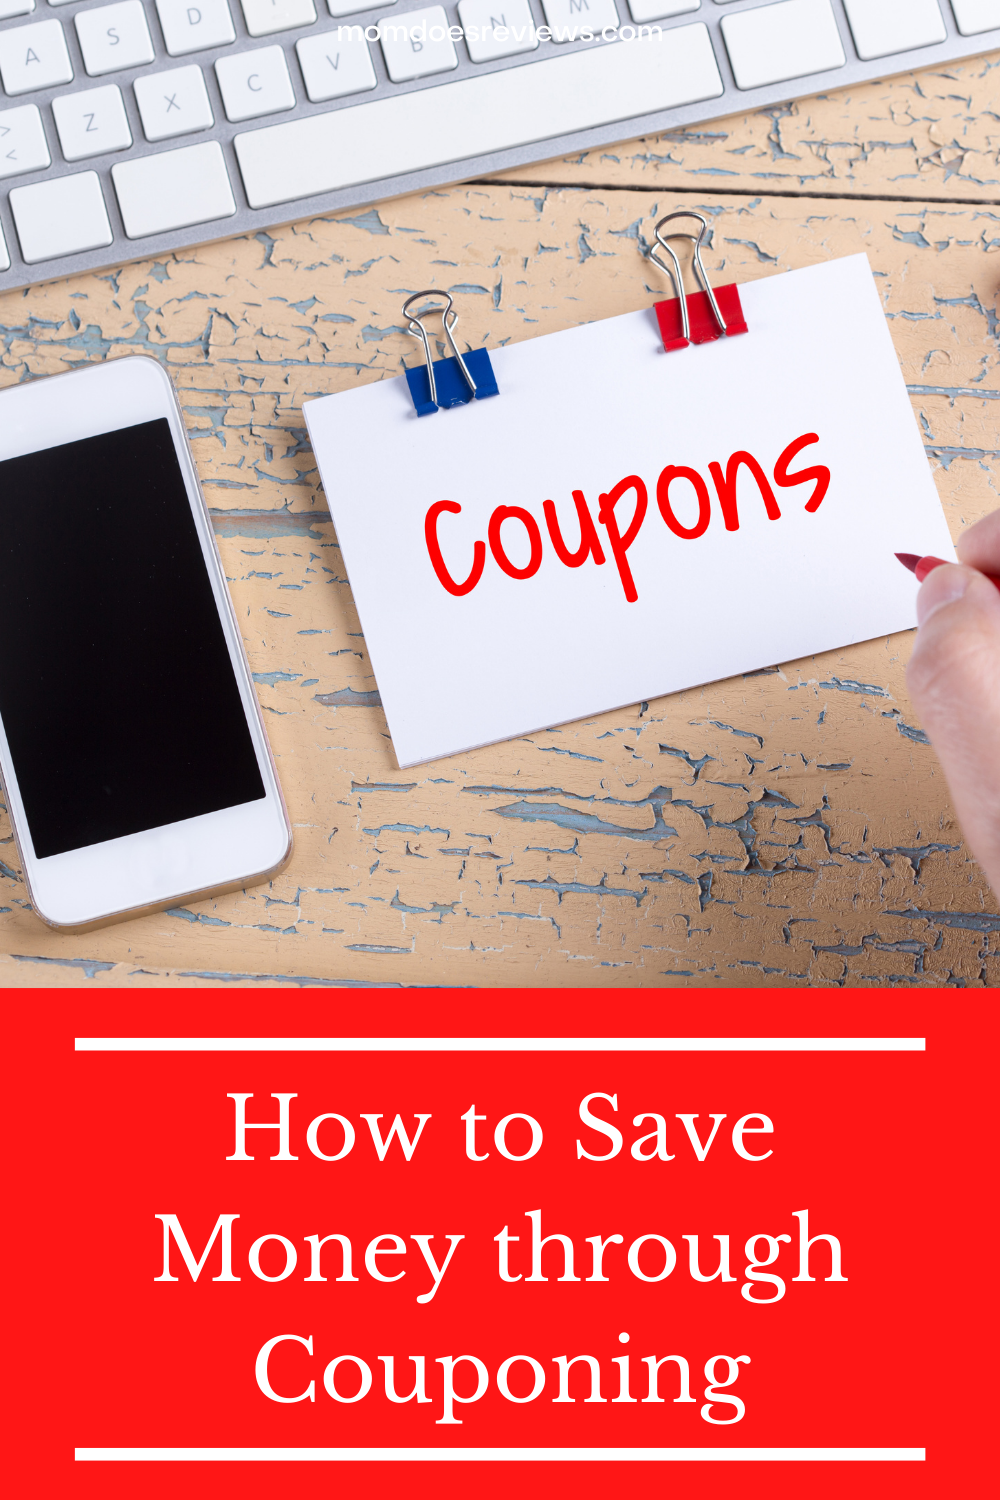 Tips to Save Money on Groceries Through Couponing